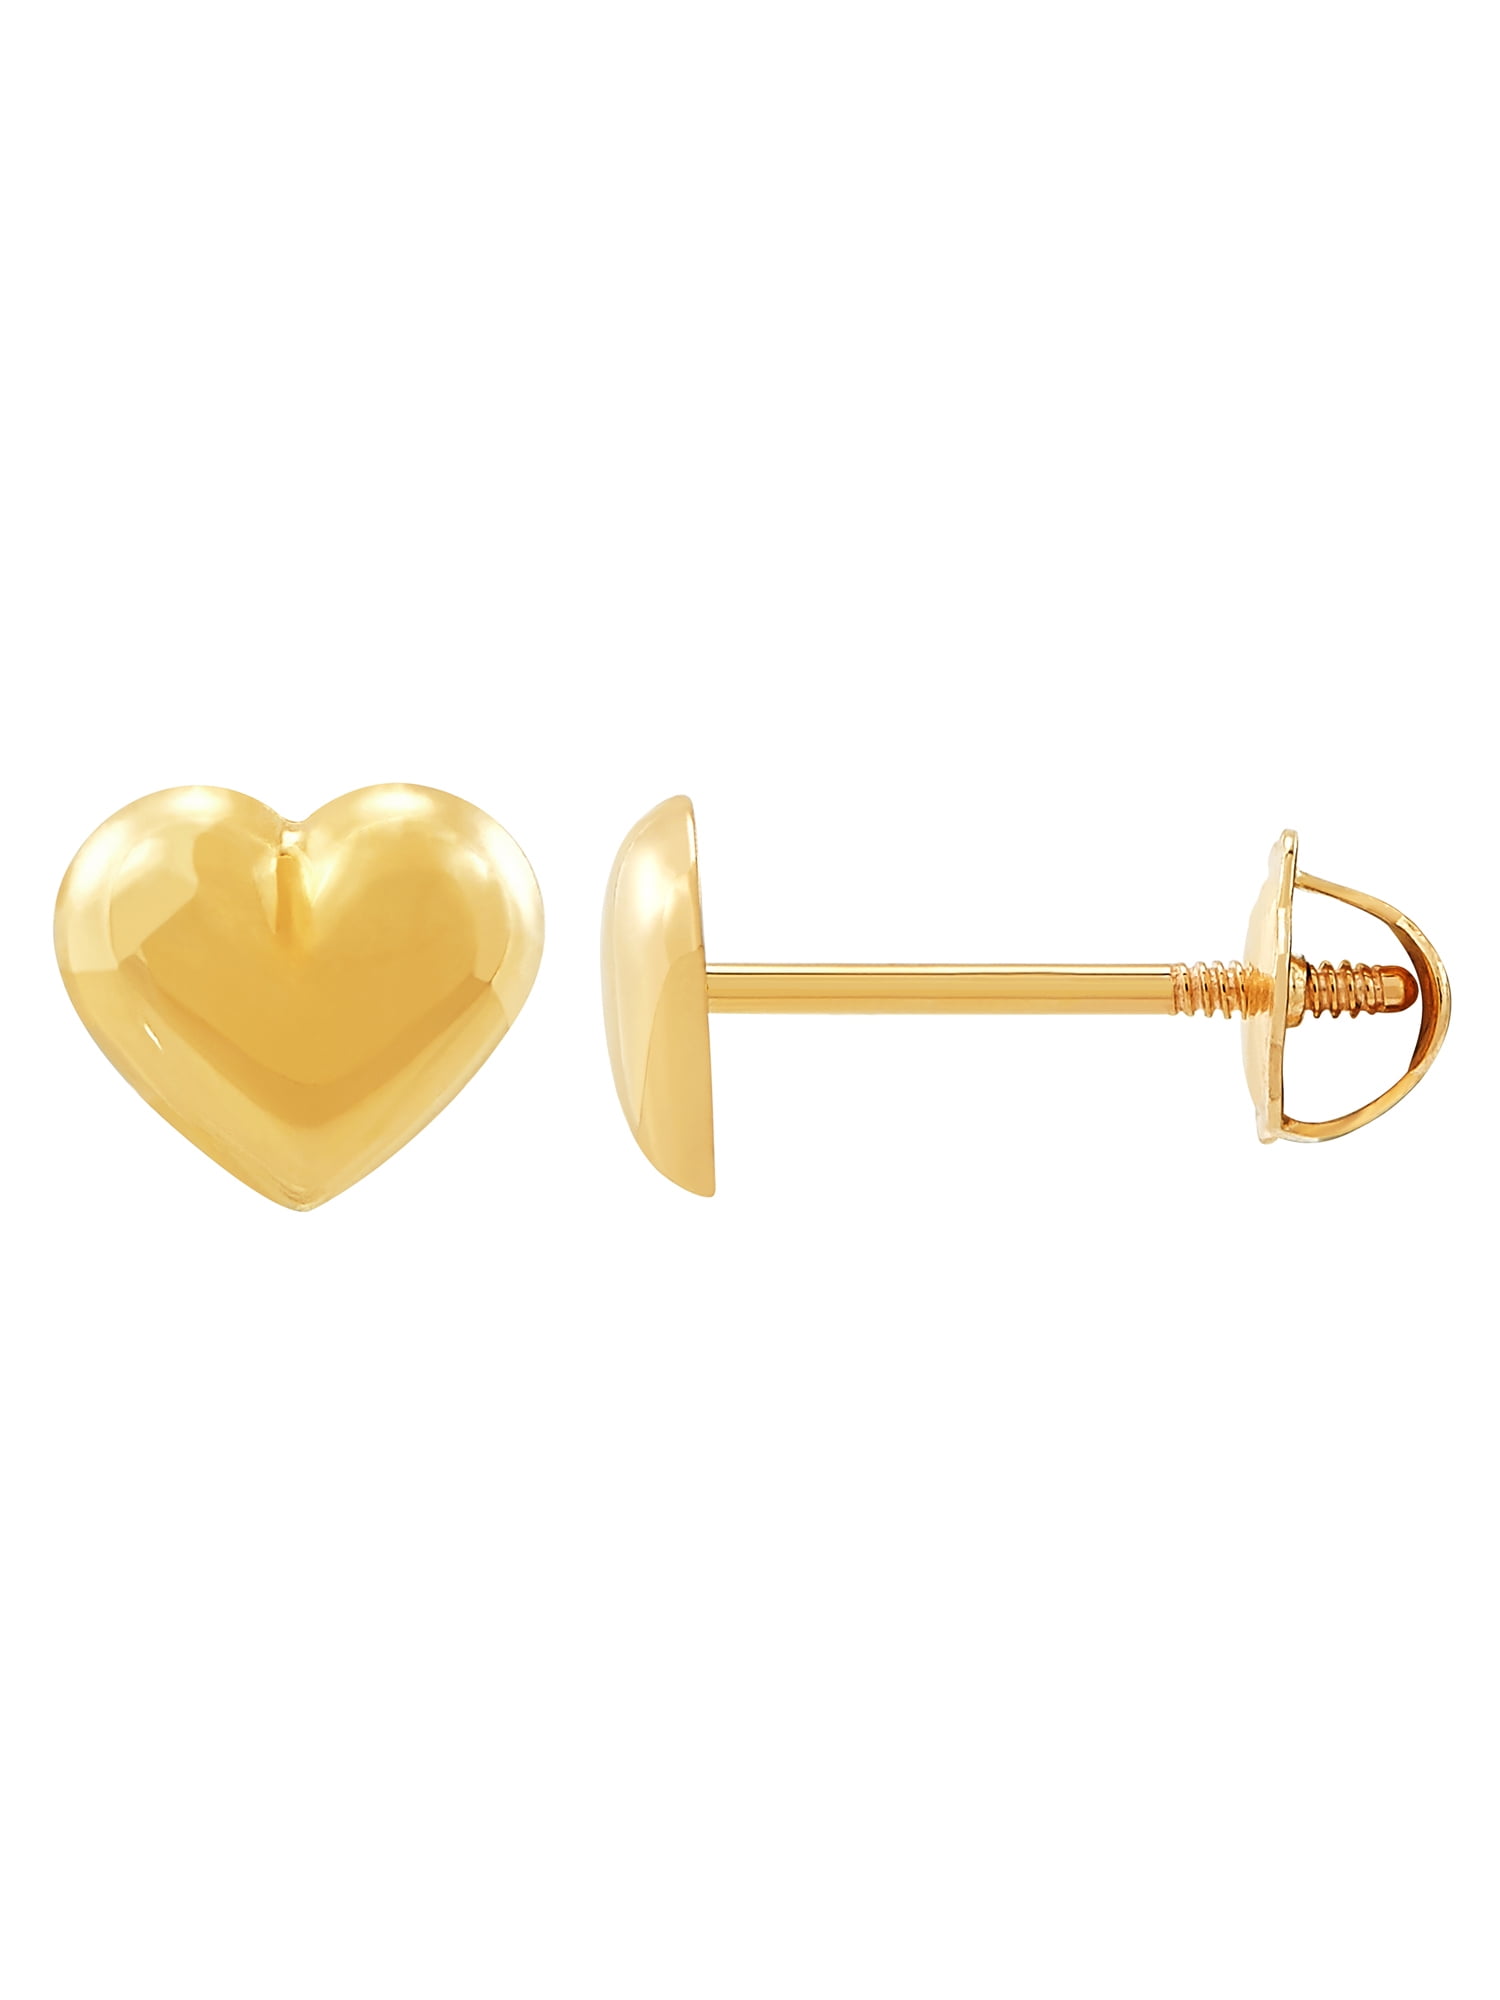 Brilliance Fine Jewelry 10K Yellow Gold Puffed Heart Stud with Safety ...